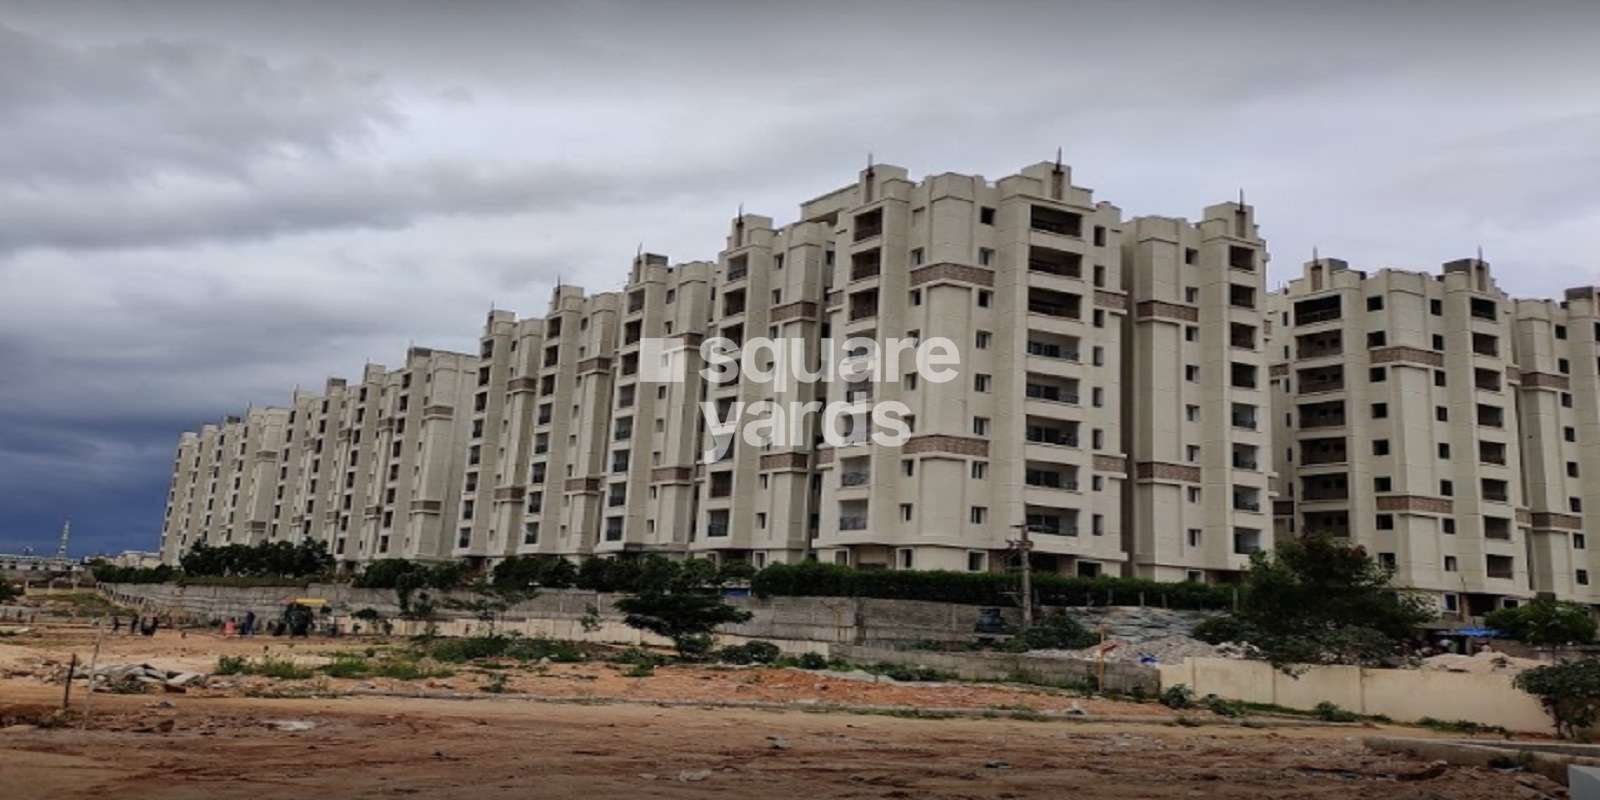 Pranit Galaxy Apartments Cover Image